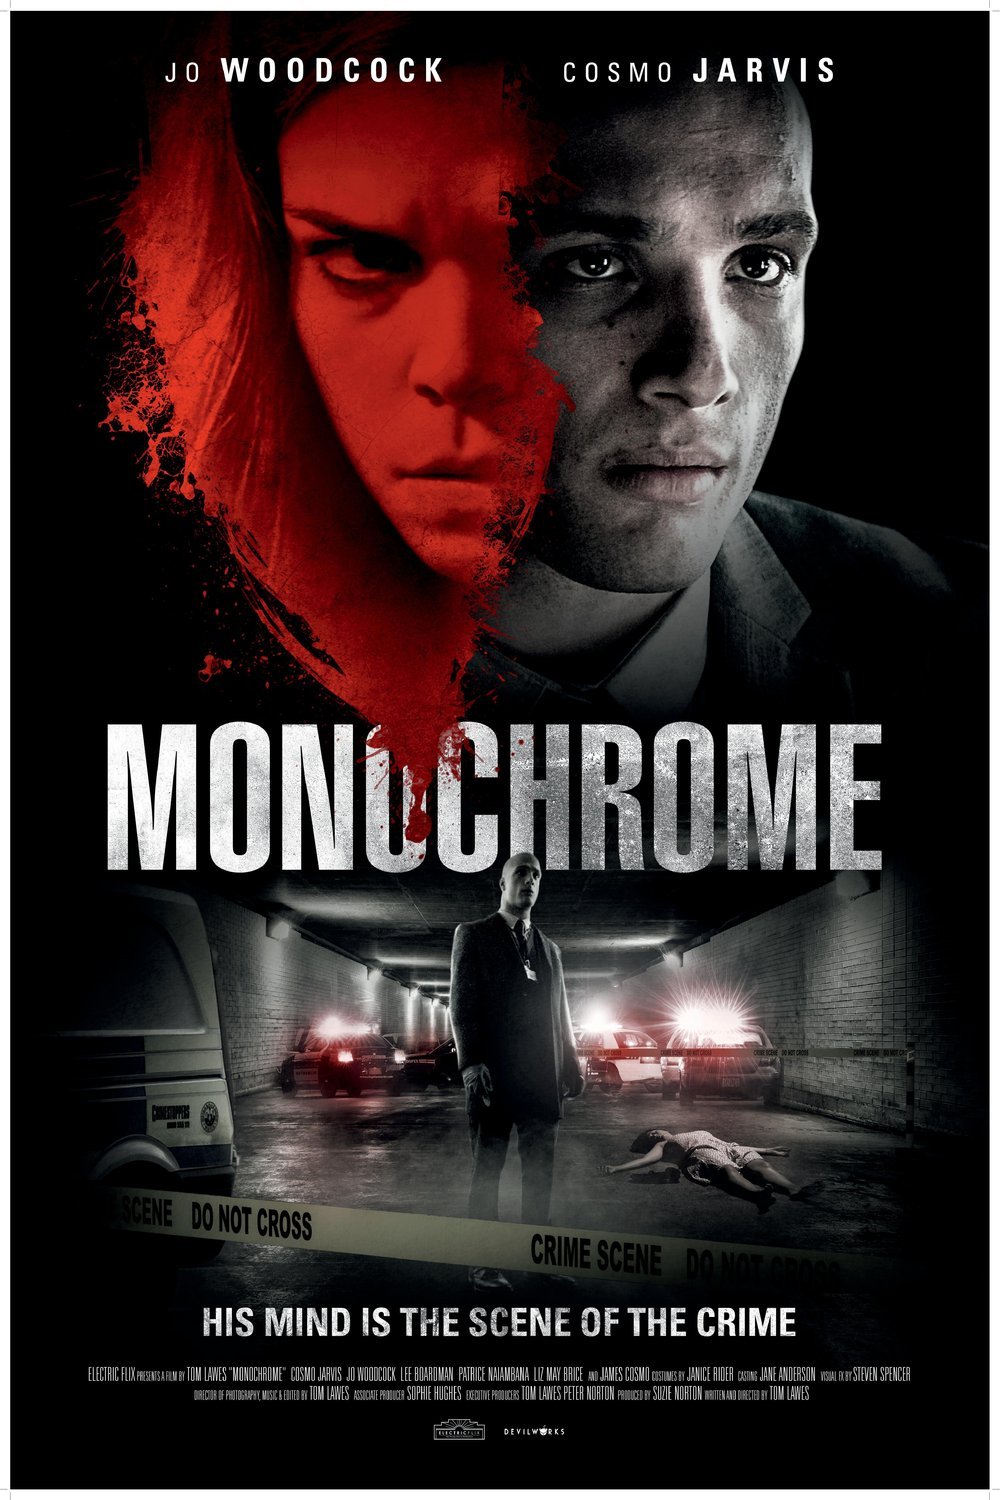 Poster of the movie Monochrome